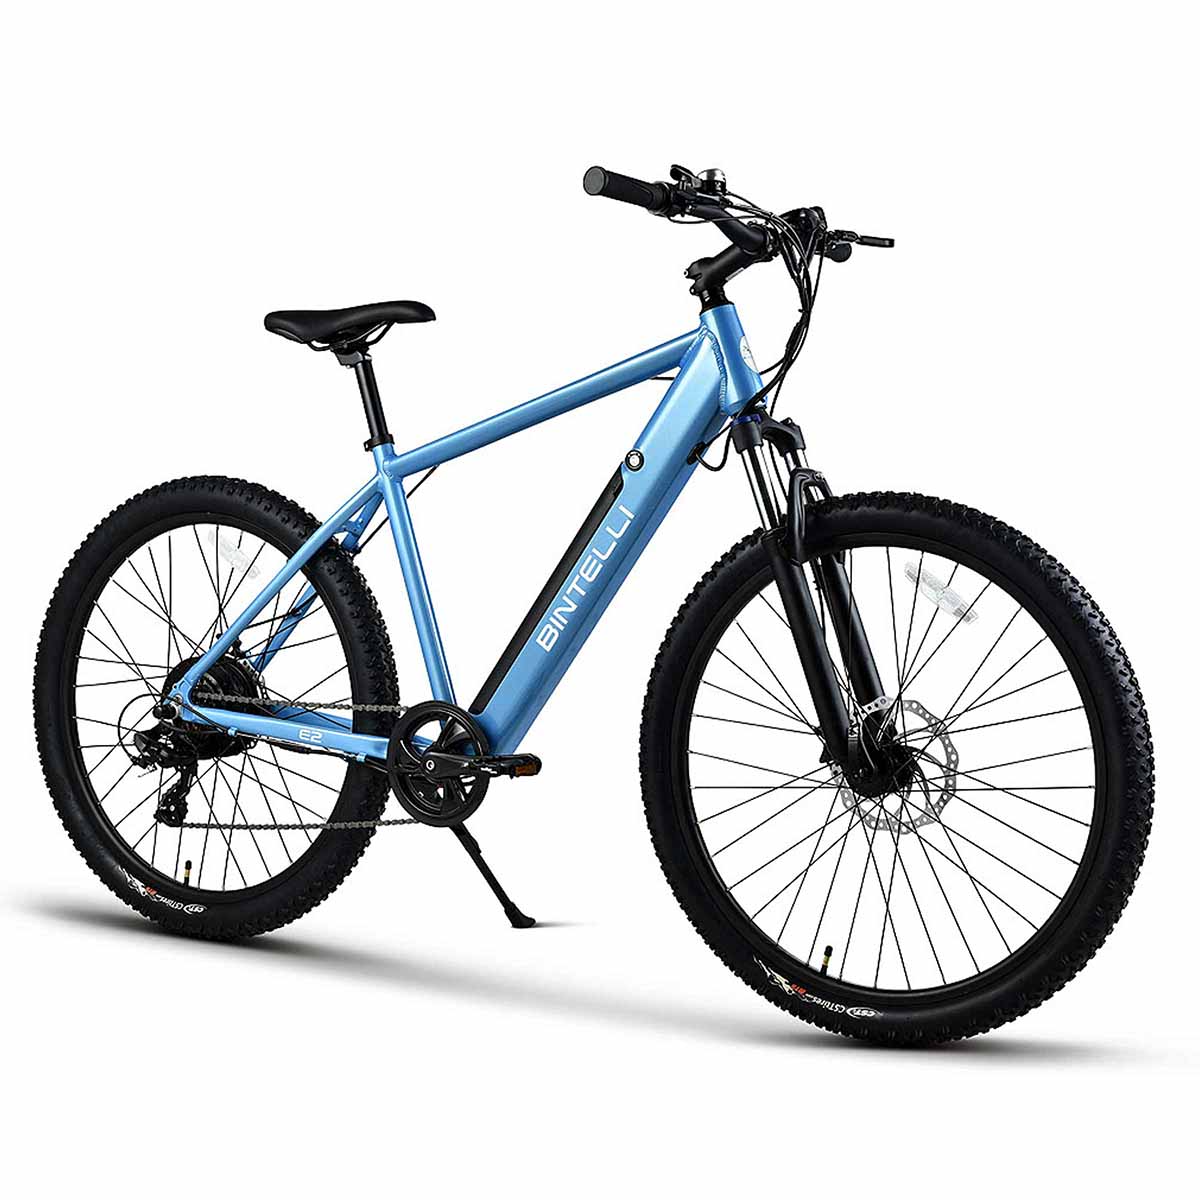 The Modern Bintelli E2 Electric Bicycle in blue speeds up to 20 mph